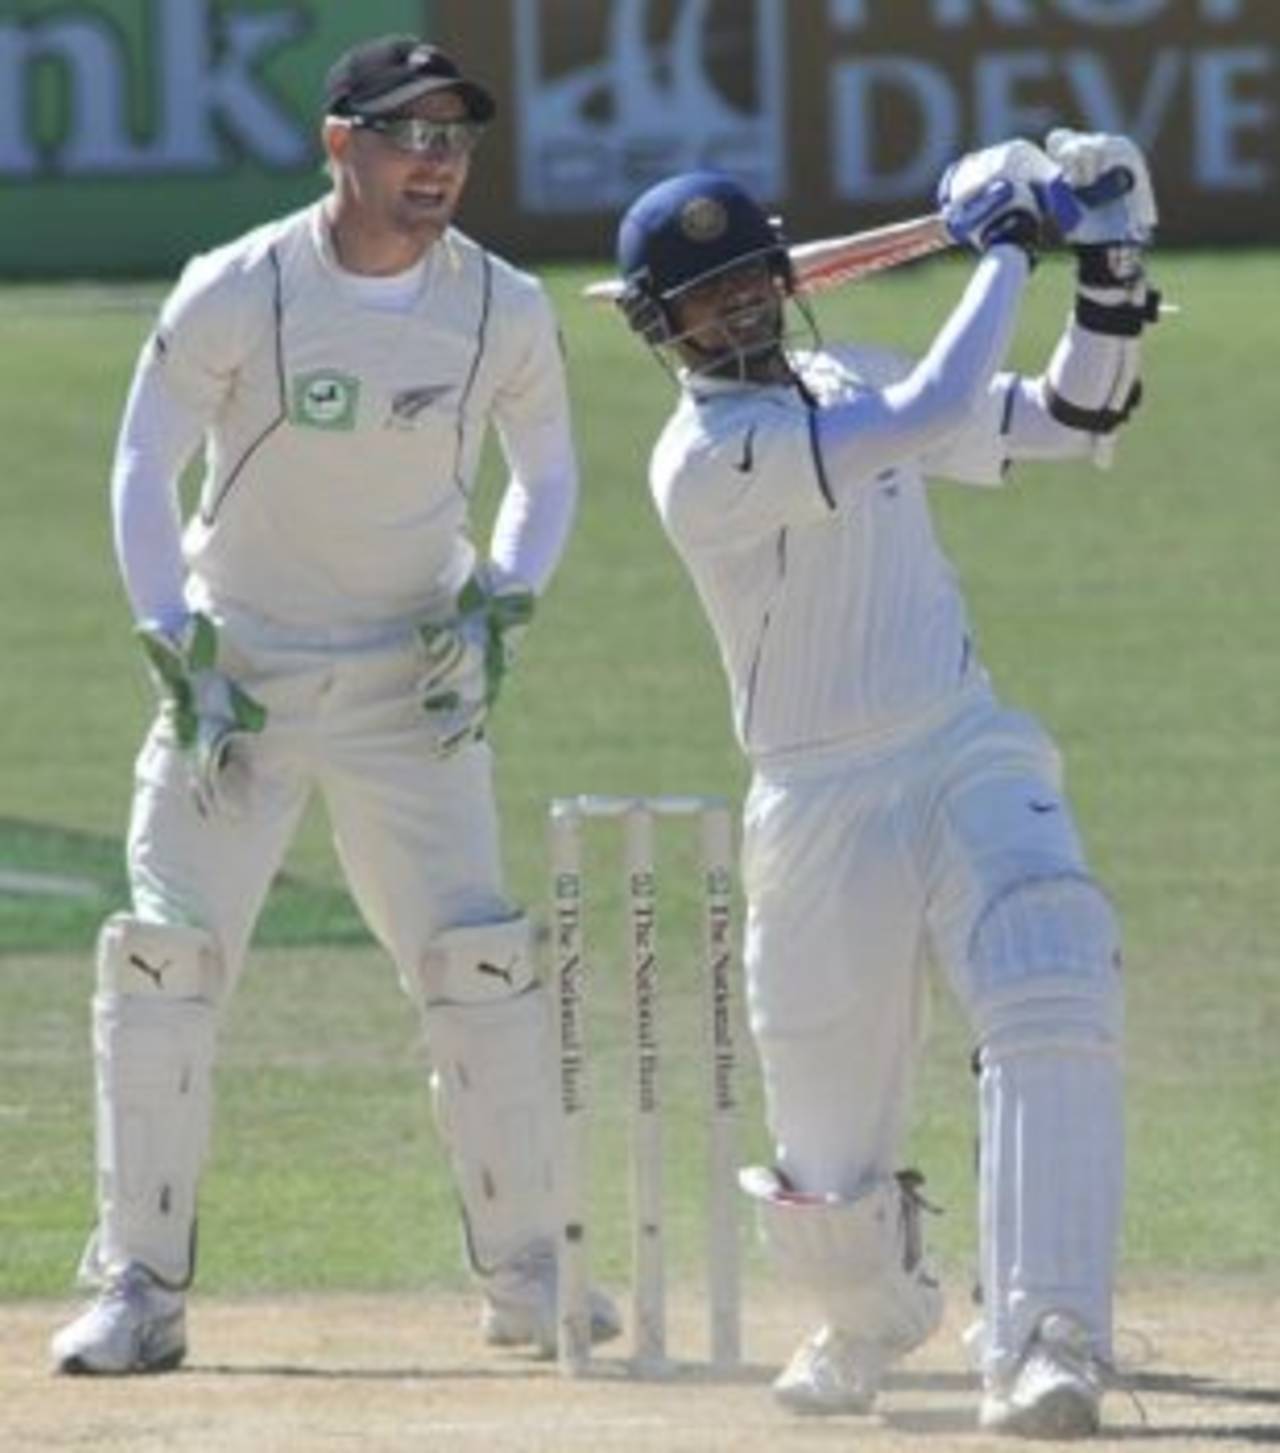 Rahul Dravid pulls, New Zealand v India, 2nd Test, Napier, 4th day, March 29, 2009